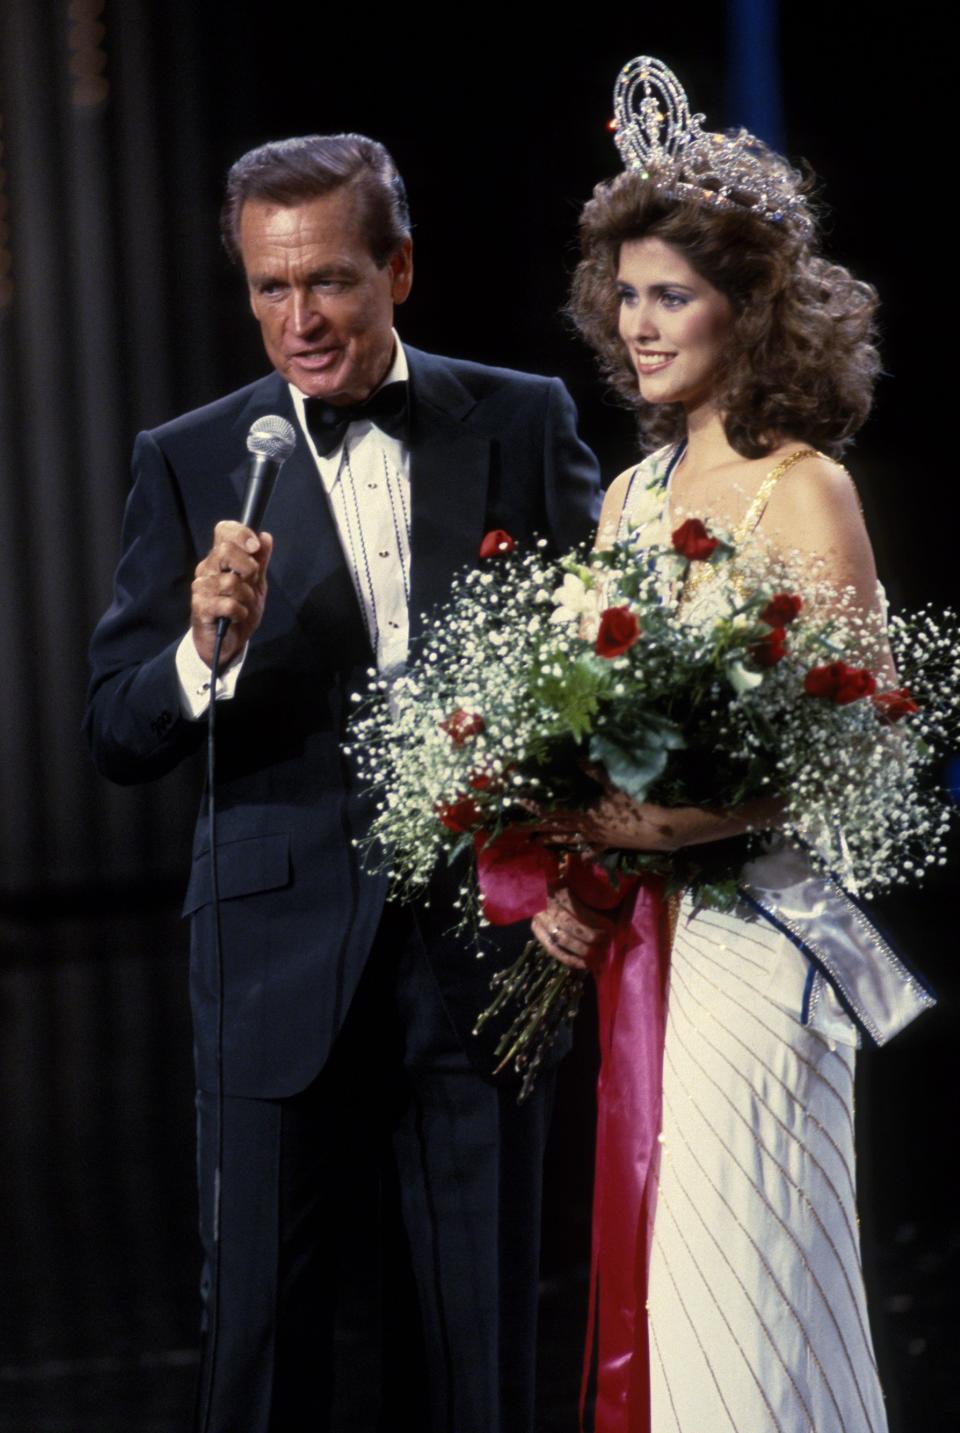 Bob Barker and Miss Universe 1985 stand on a stage.